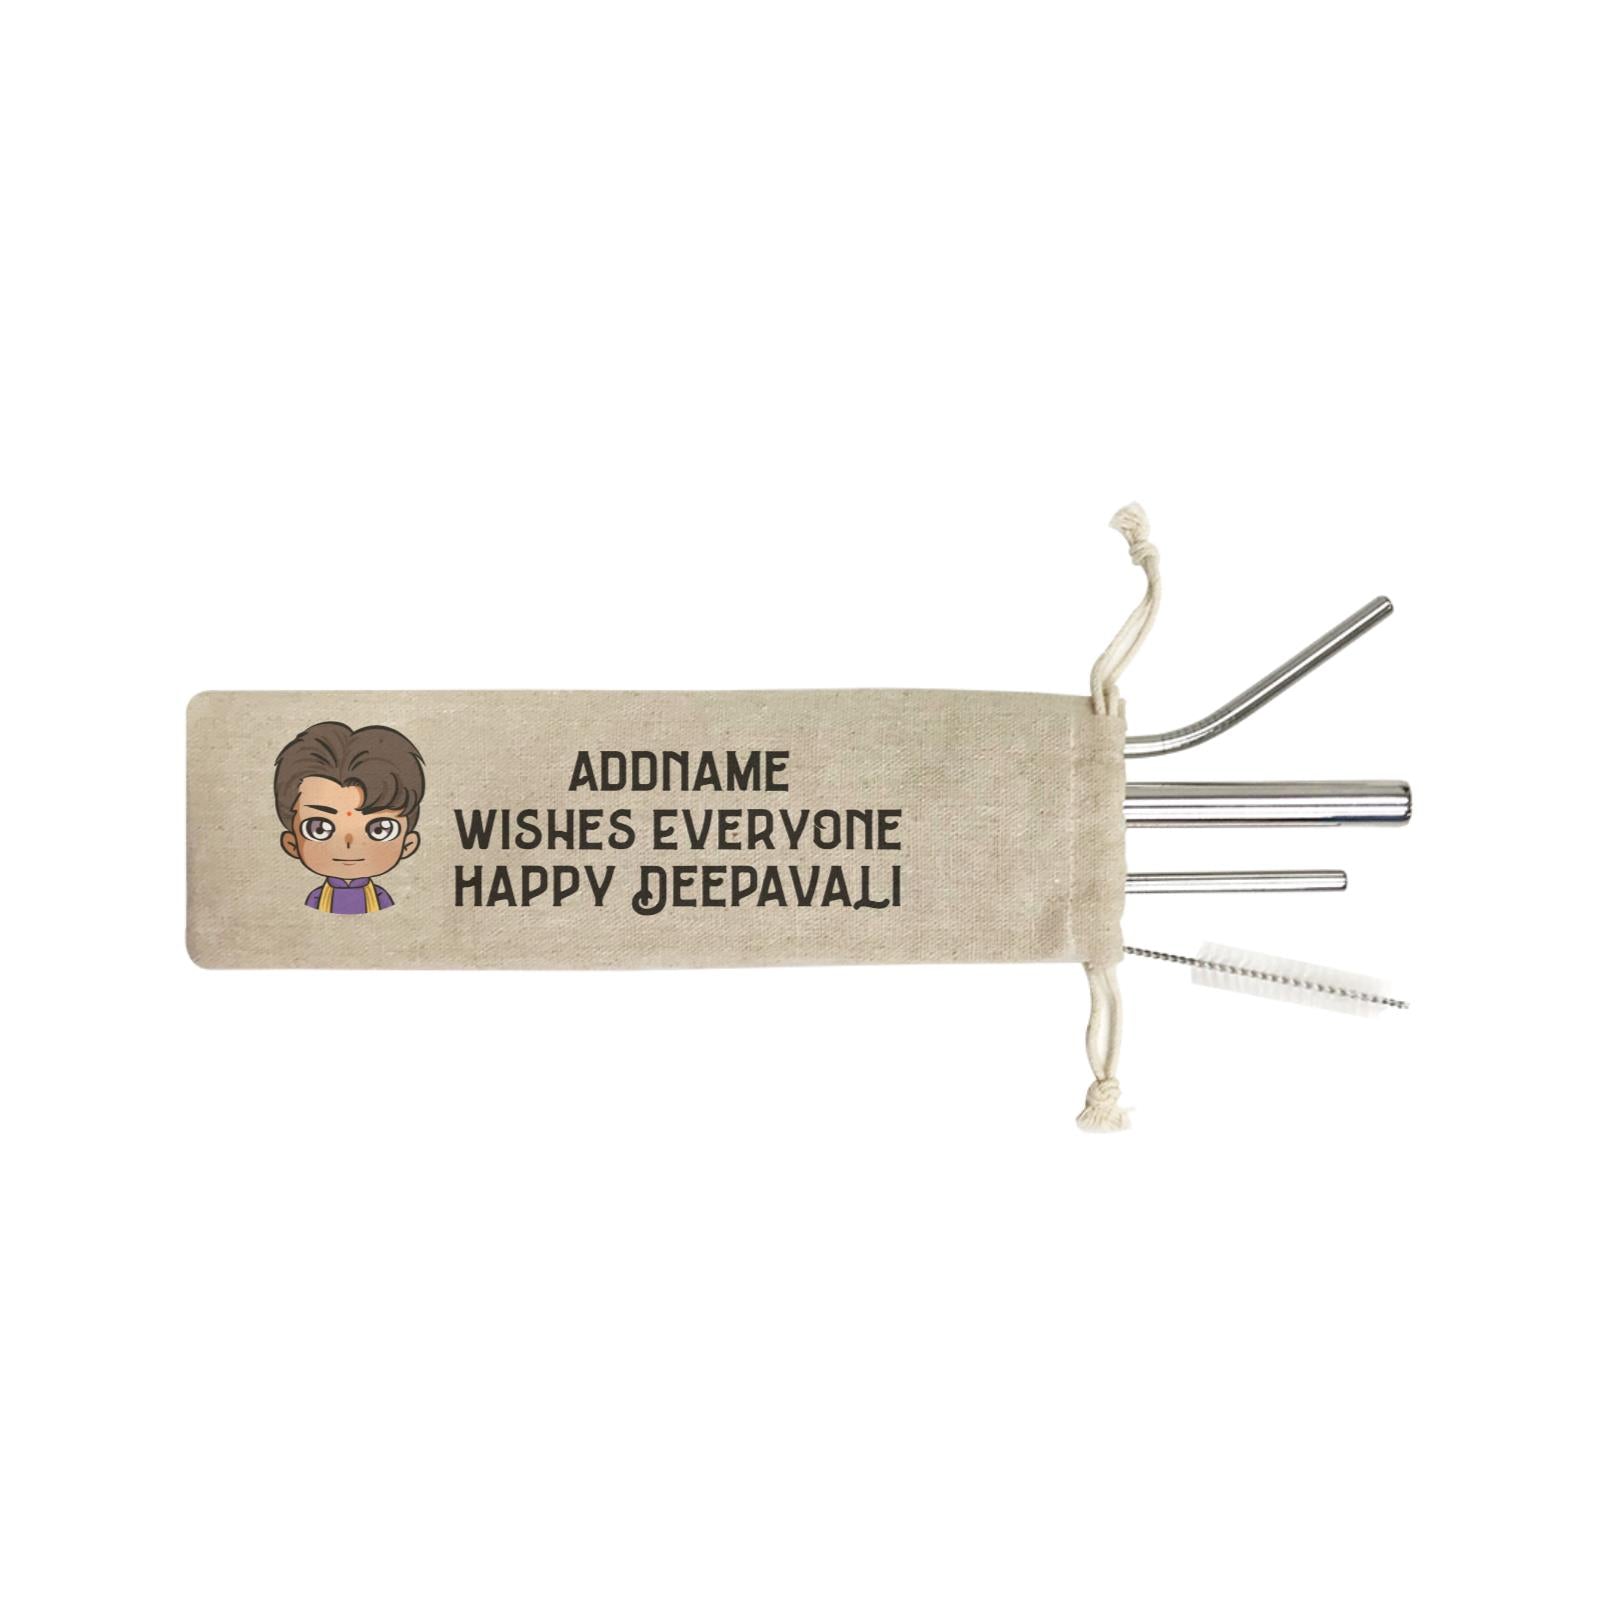 Deepavali Chibi Man Front Addname Wishes Everyone Deepavali SB 4-In-1 Stainless Steel Straw Set in Satchel